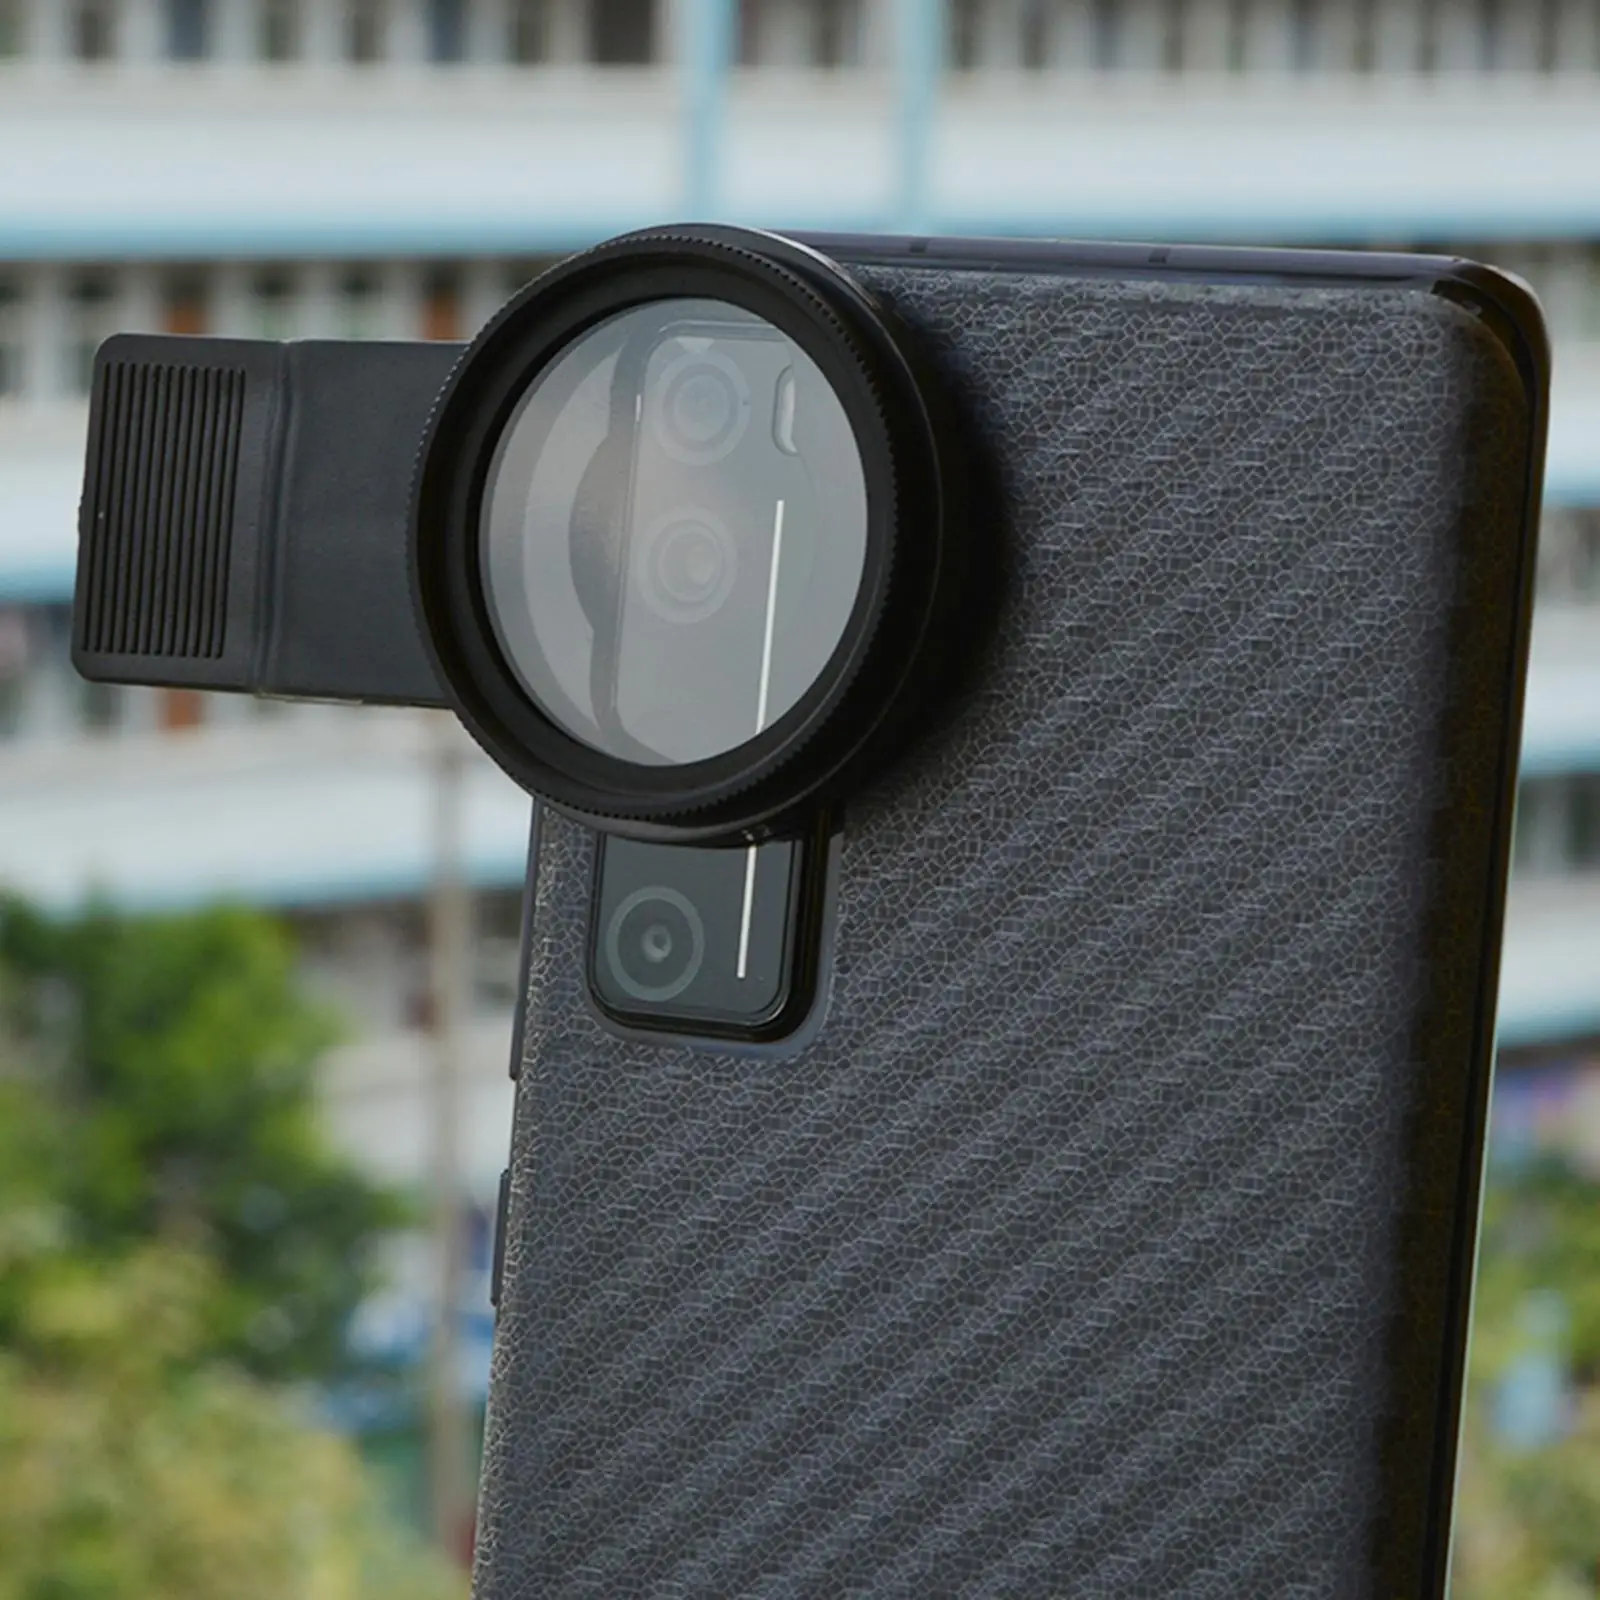 Soft Focus Lens Filter 37mm with Clip Reduces Glare for Portraiture Phone